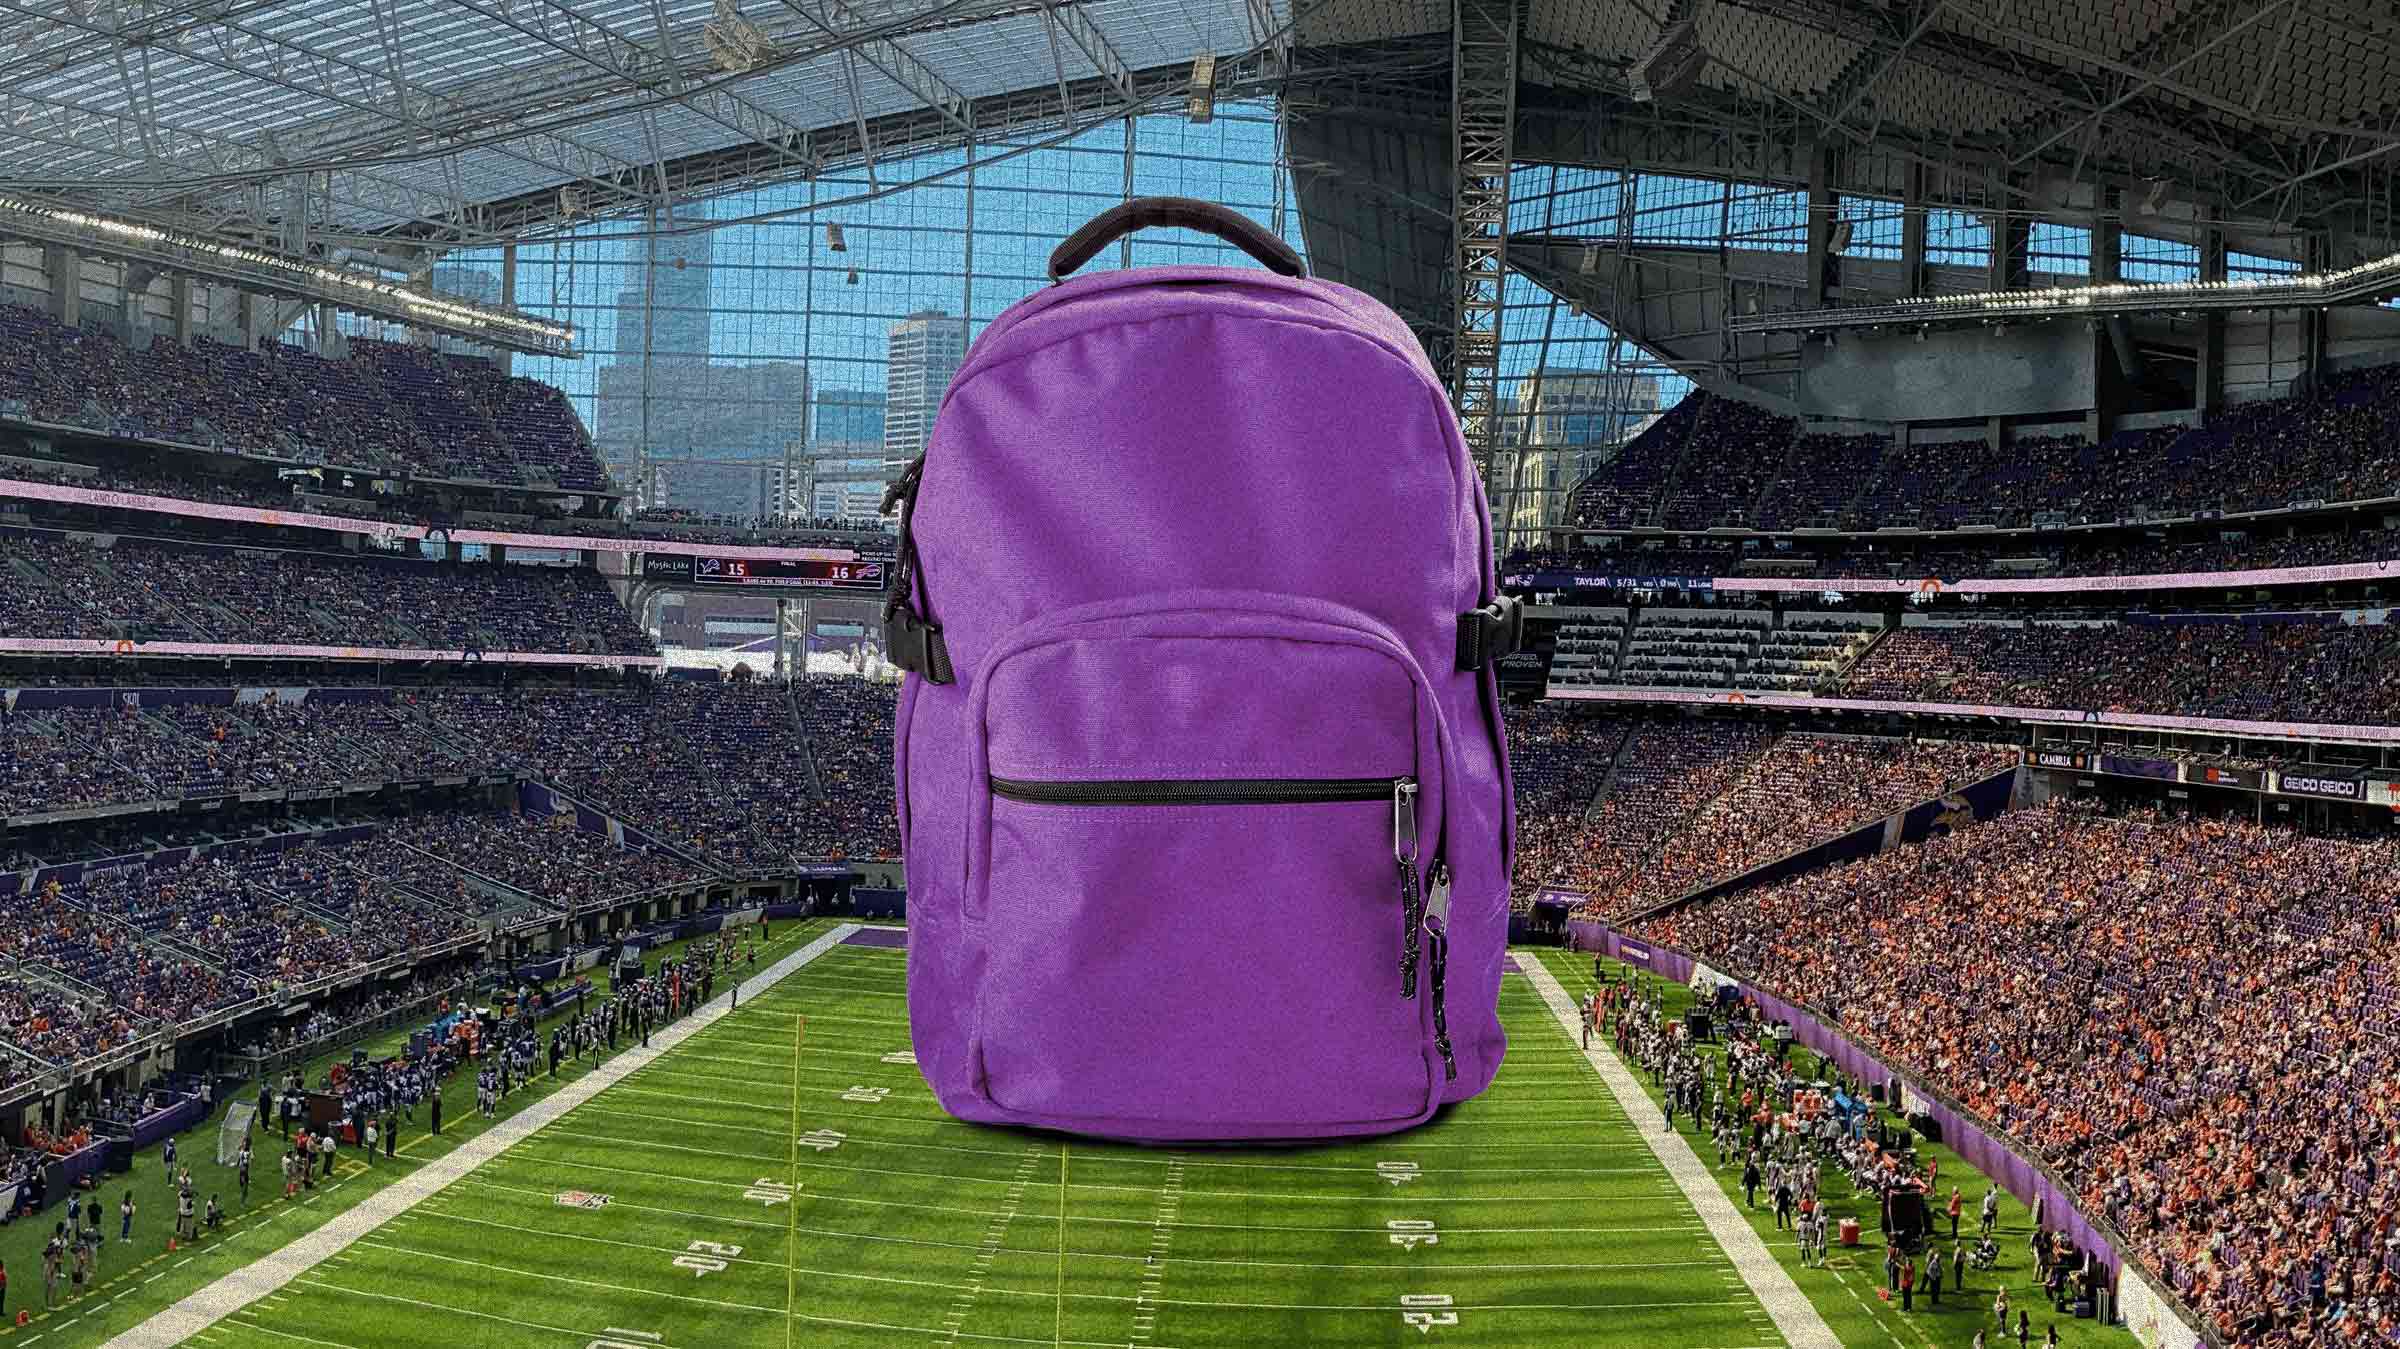 A backpack is placed in front of the Vikings stadium